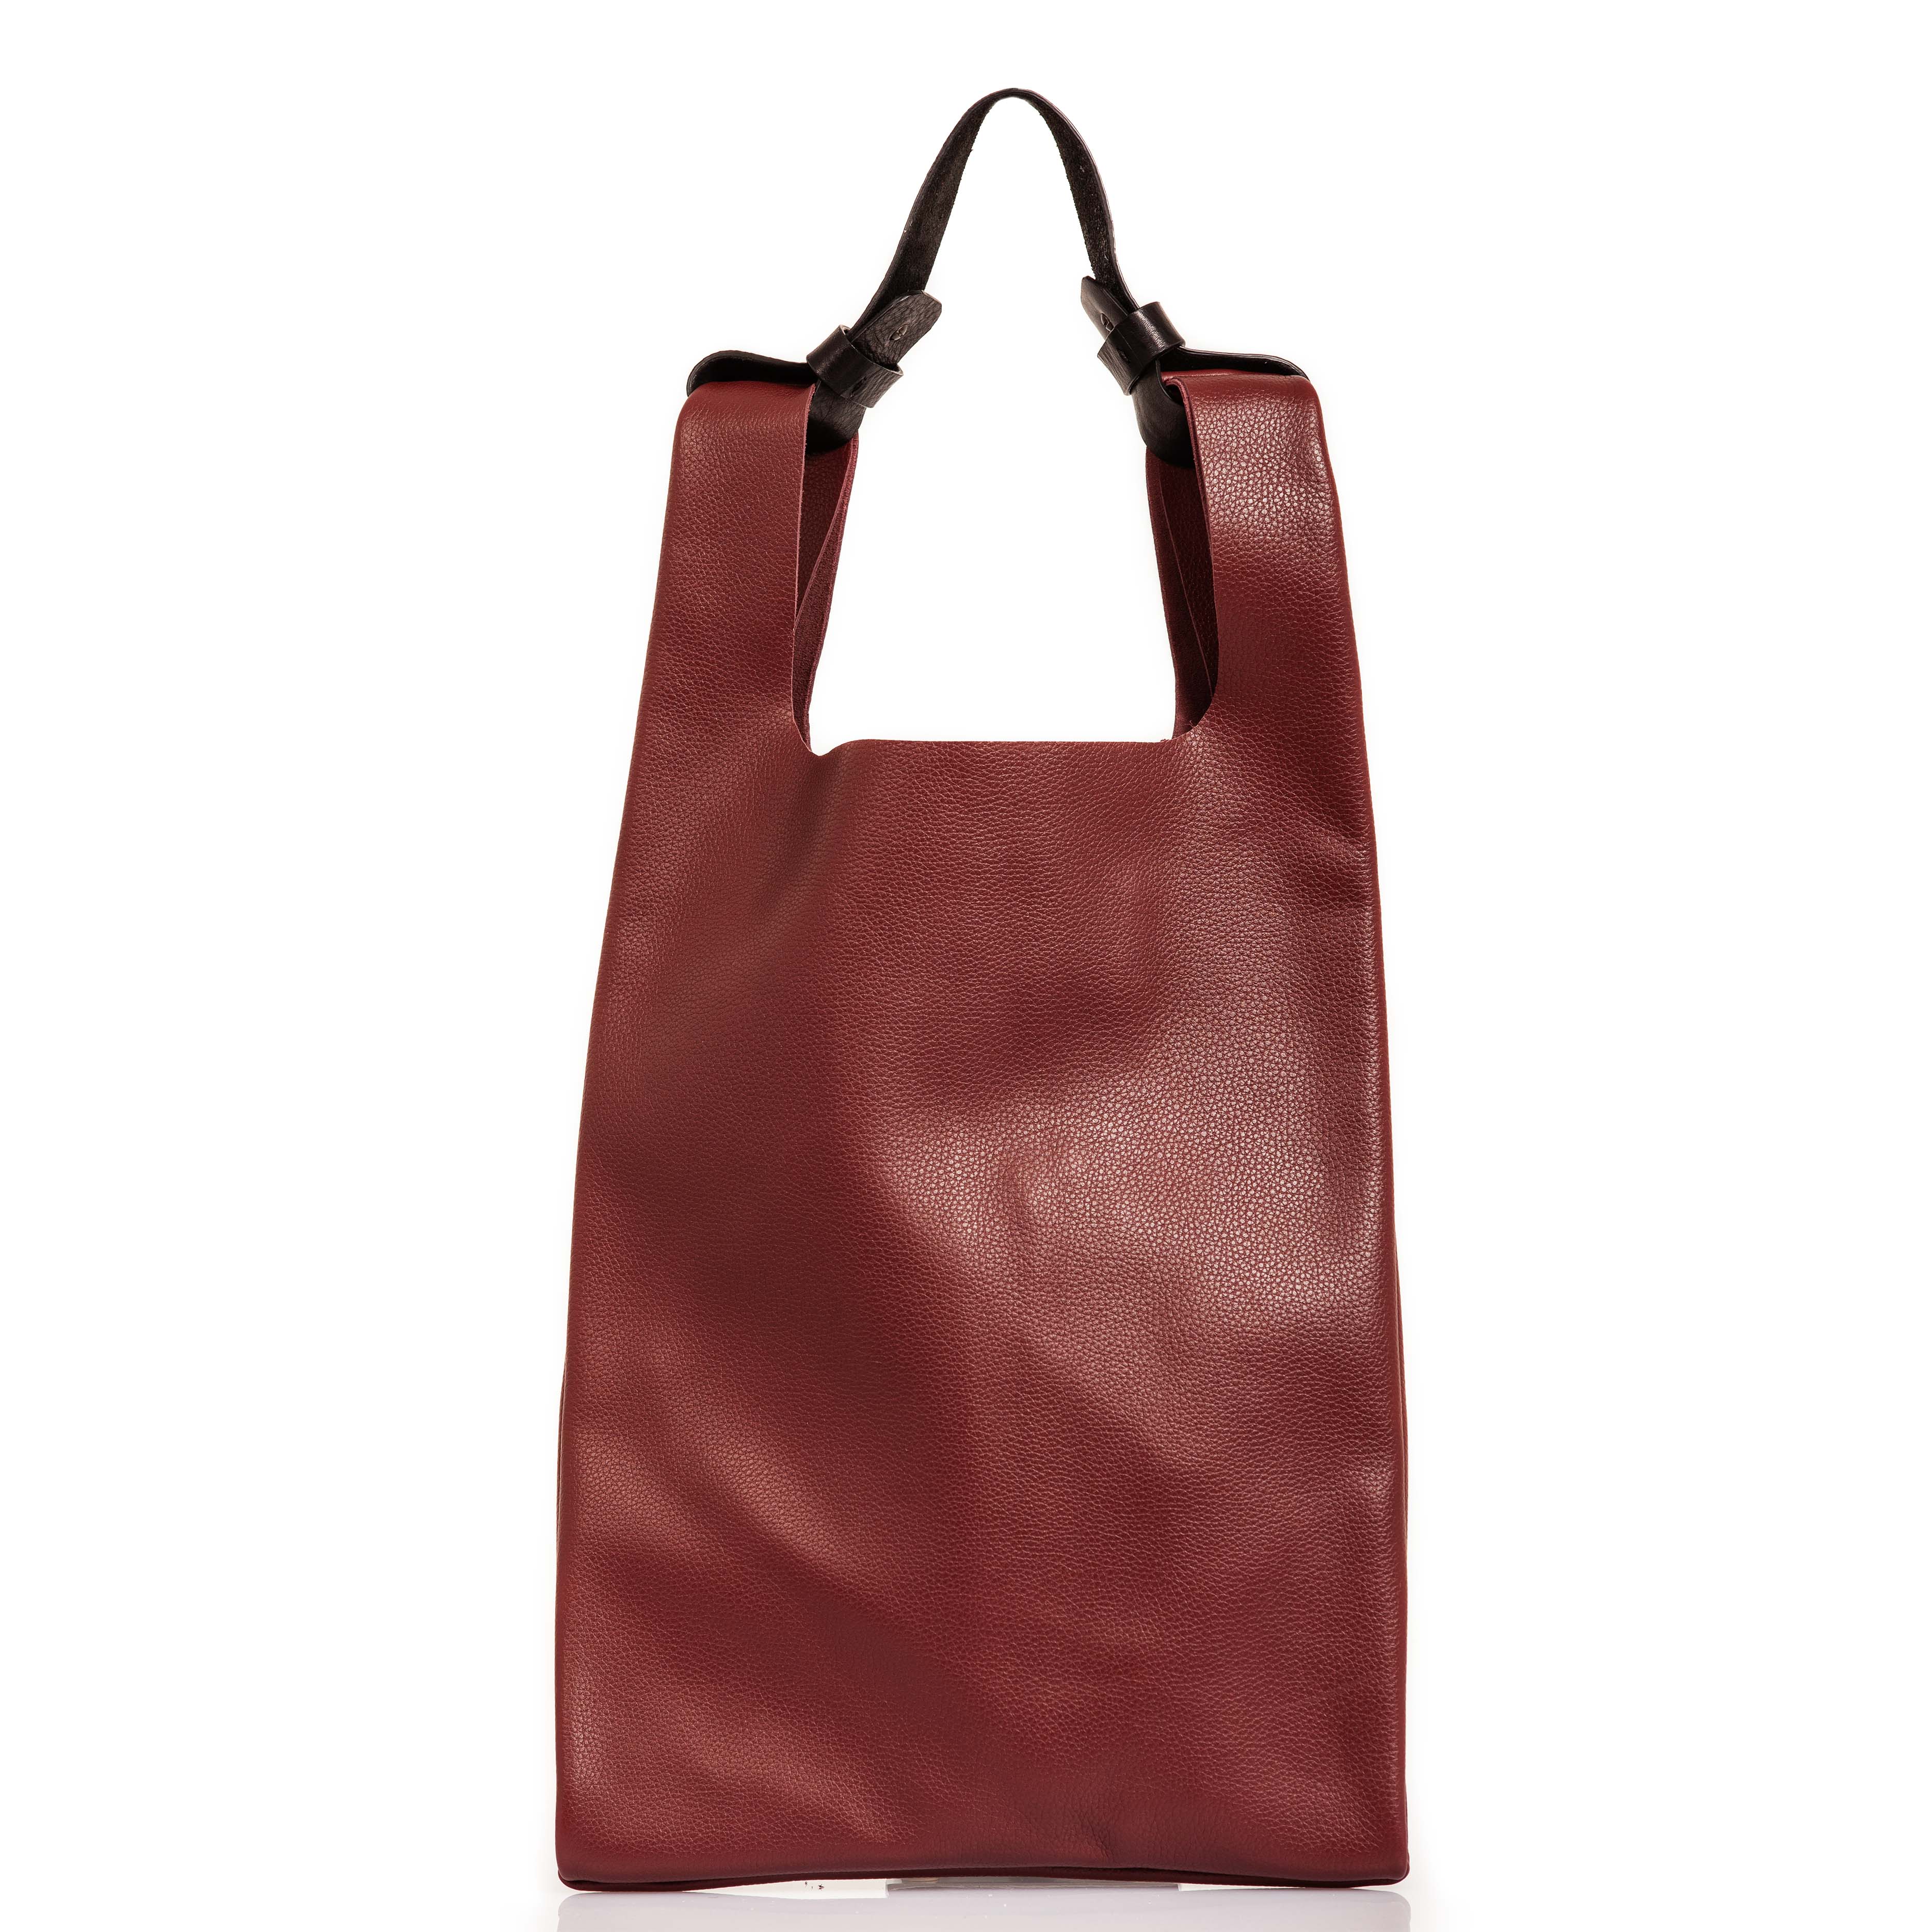 Leather Striped Grocery Bag in red striped – natthakur